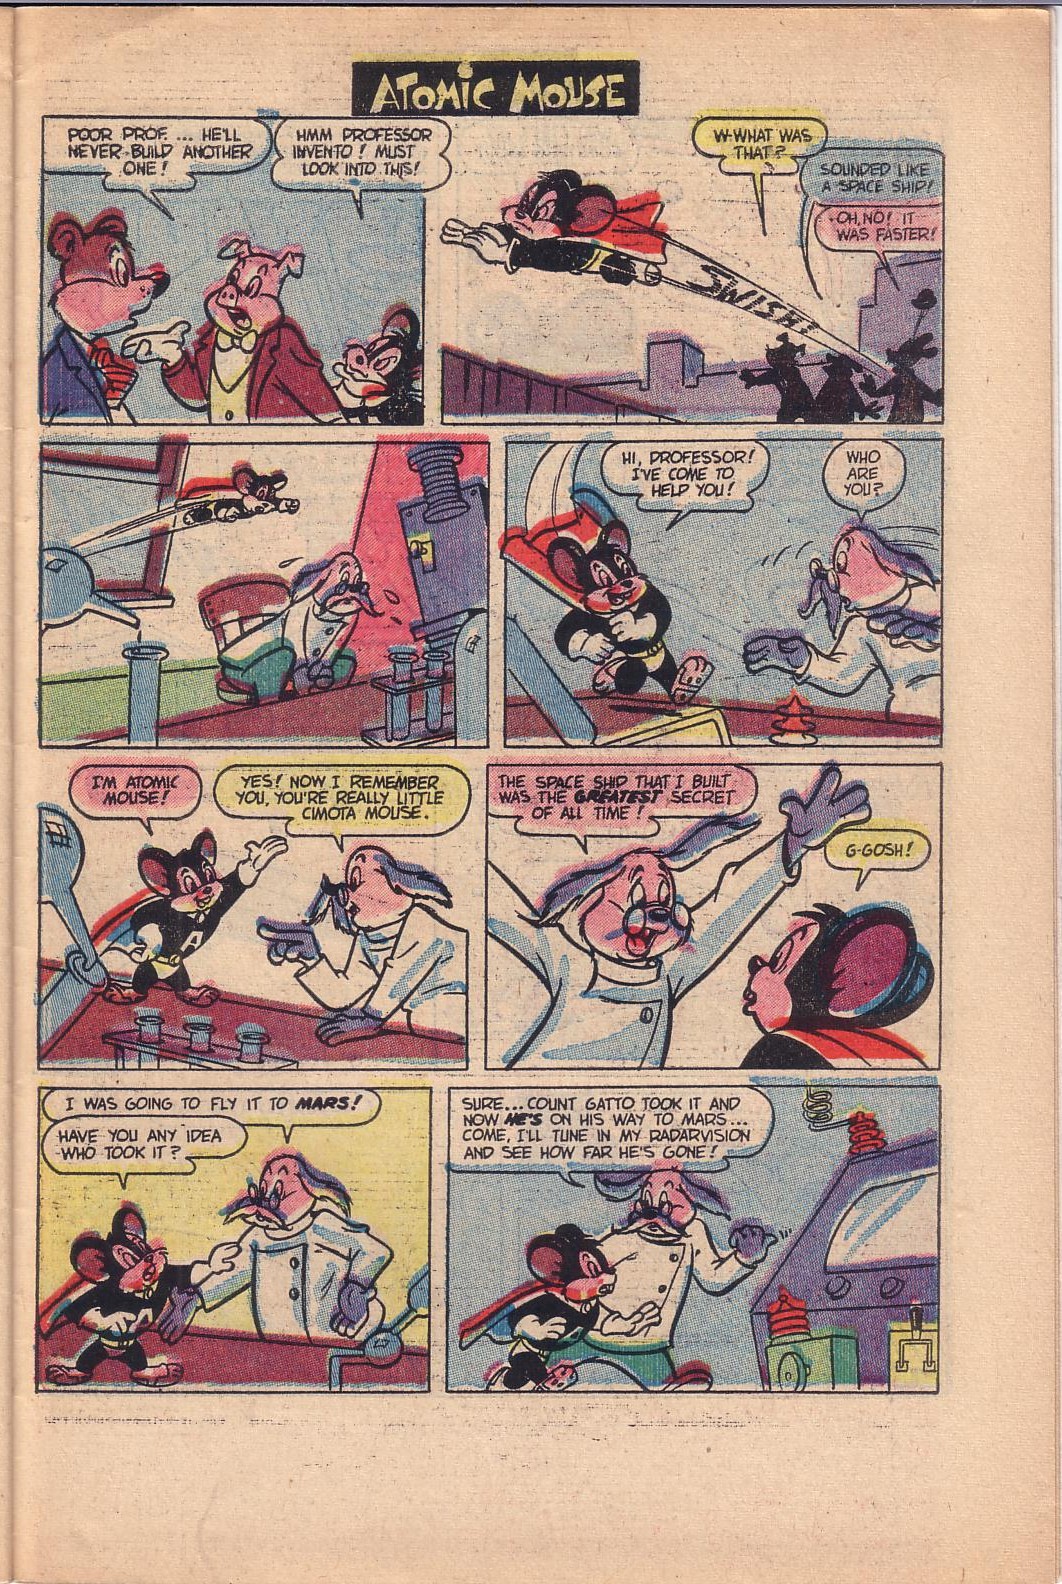 Read online Atomic Mouse comic -  Issue #1 - 26